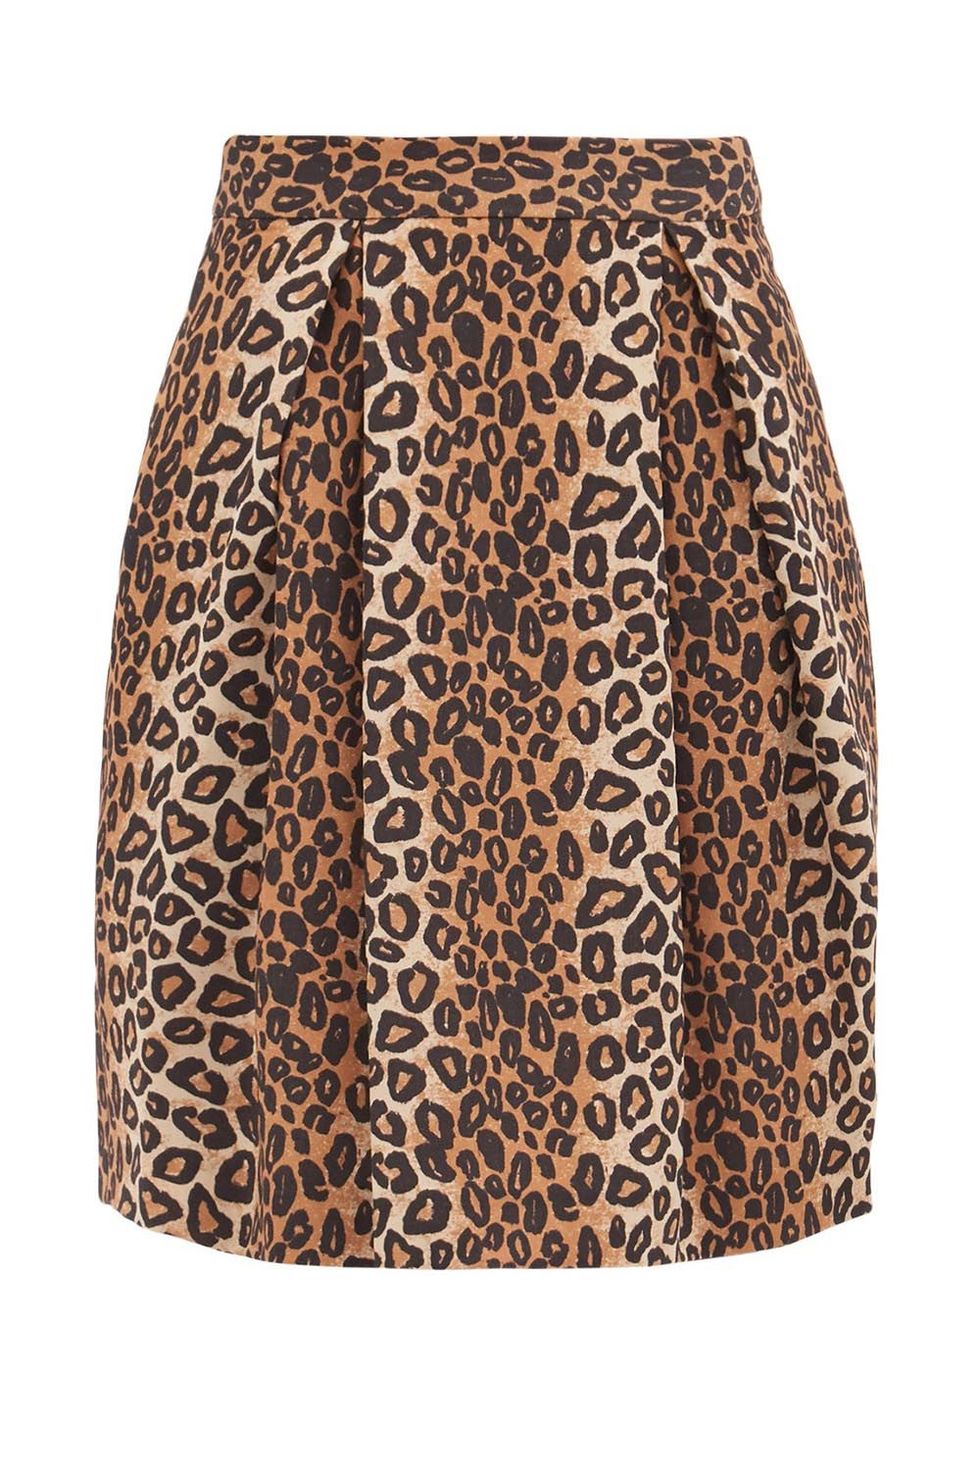 Wearing Leopard, 10 Ways to Embrace This Print